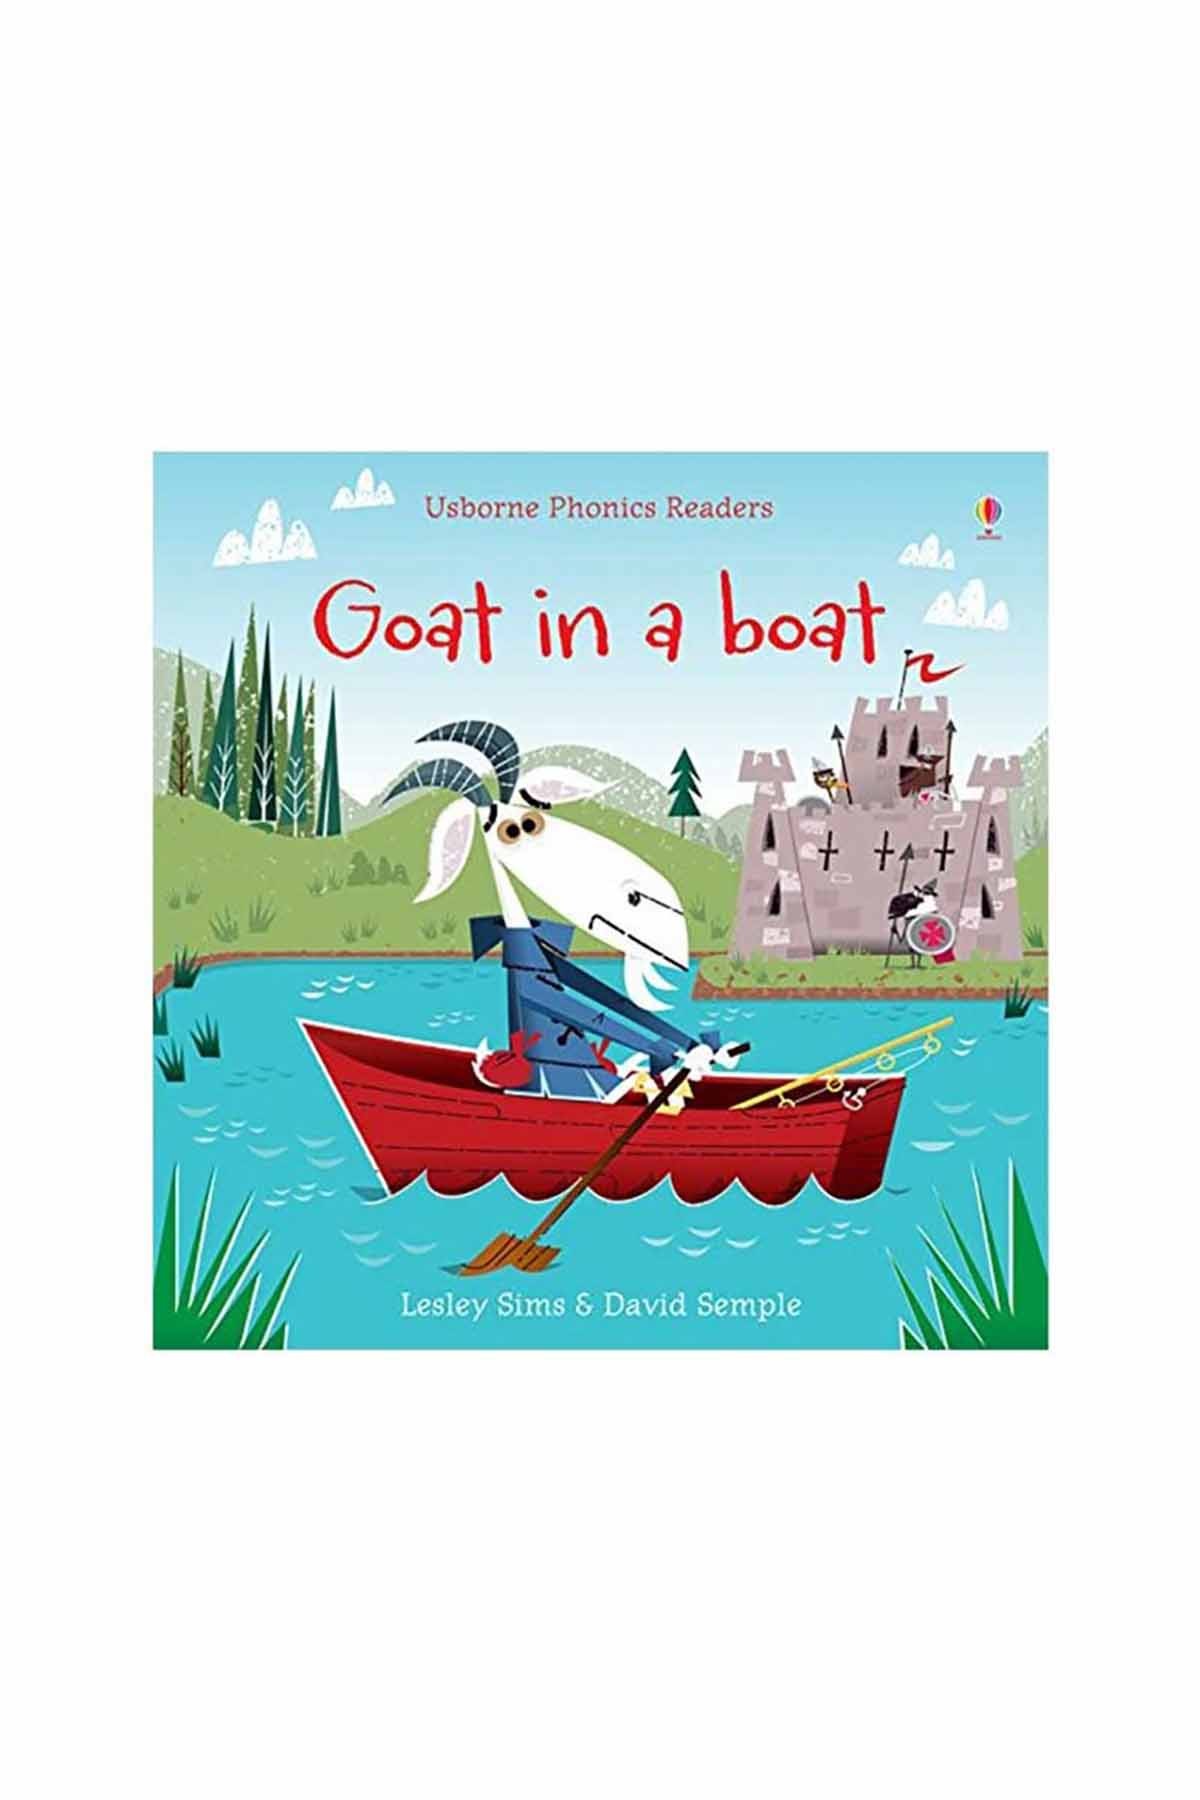 The Usborne Goat in a Boat